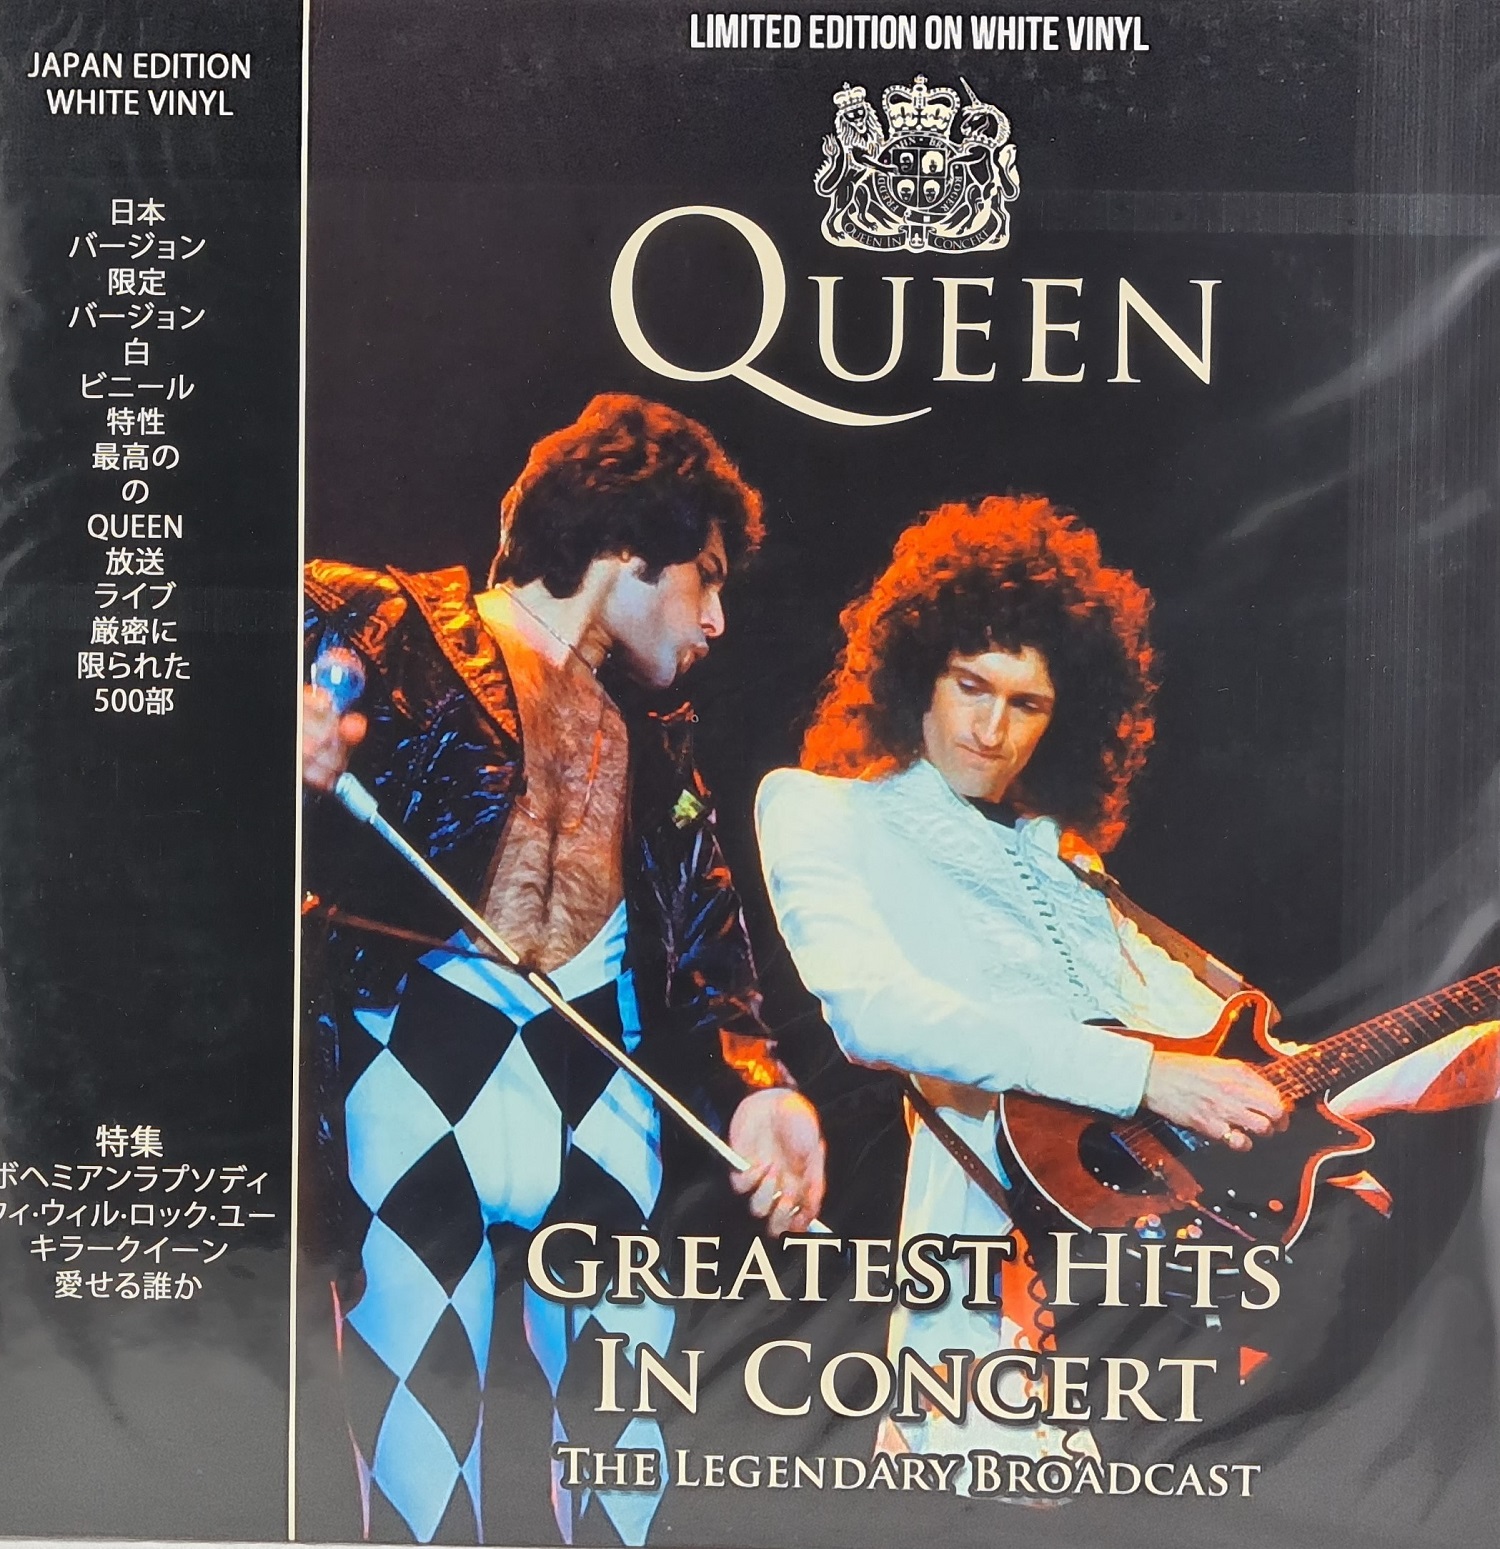 QUEEN Greatest Hits In Concert White Vinyl - New & Used Vinyl records,  music CDs, audio cassettes online shop UK